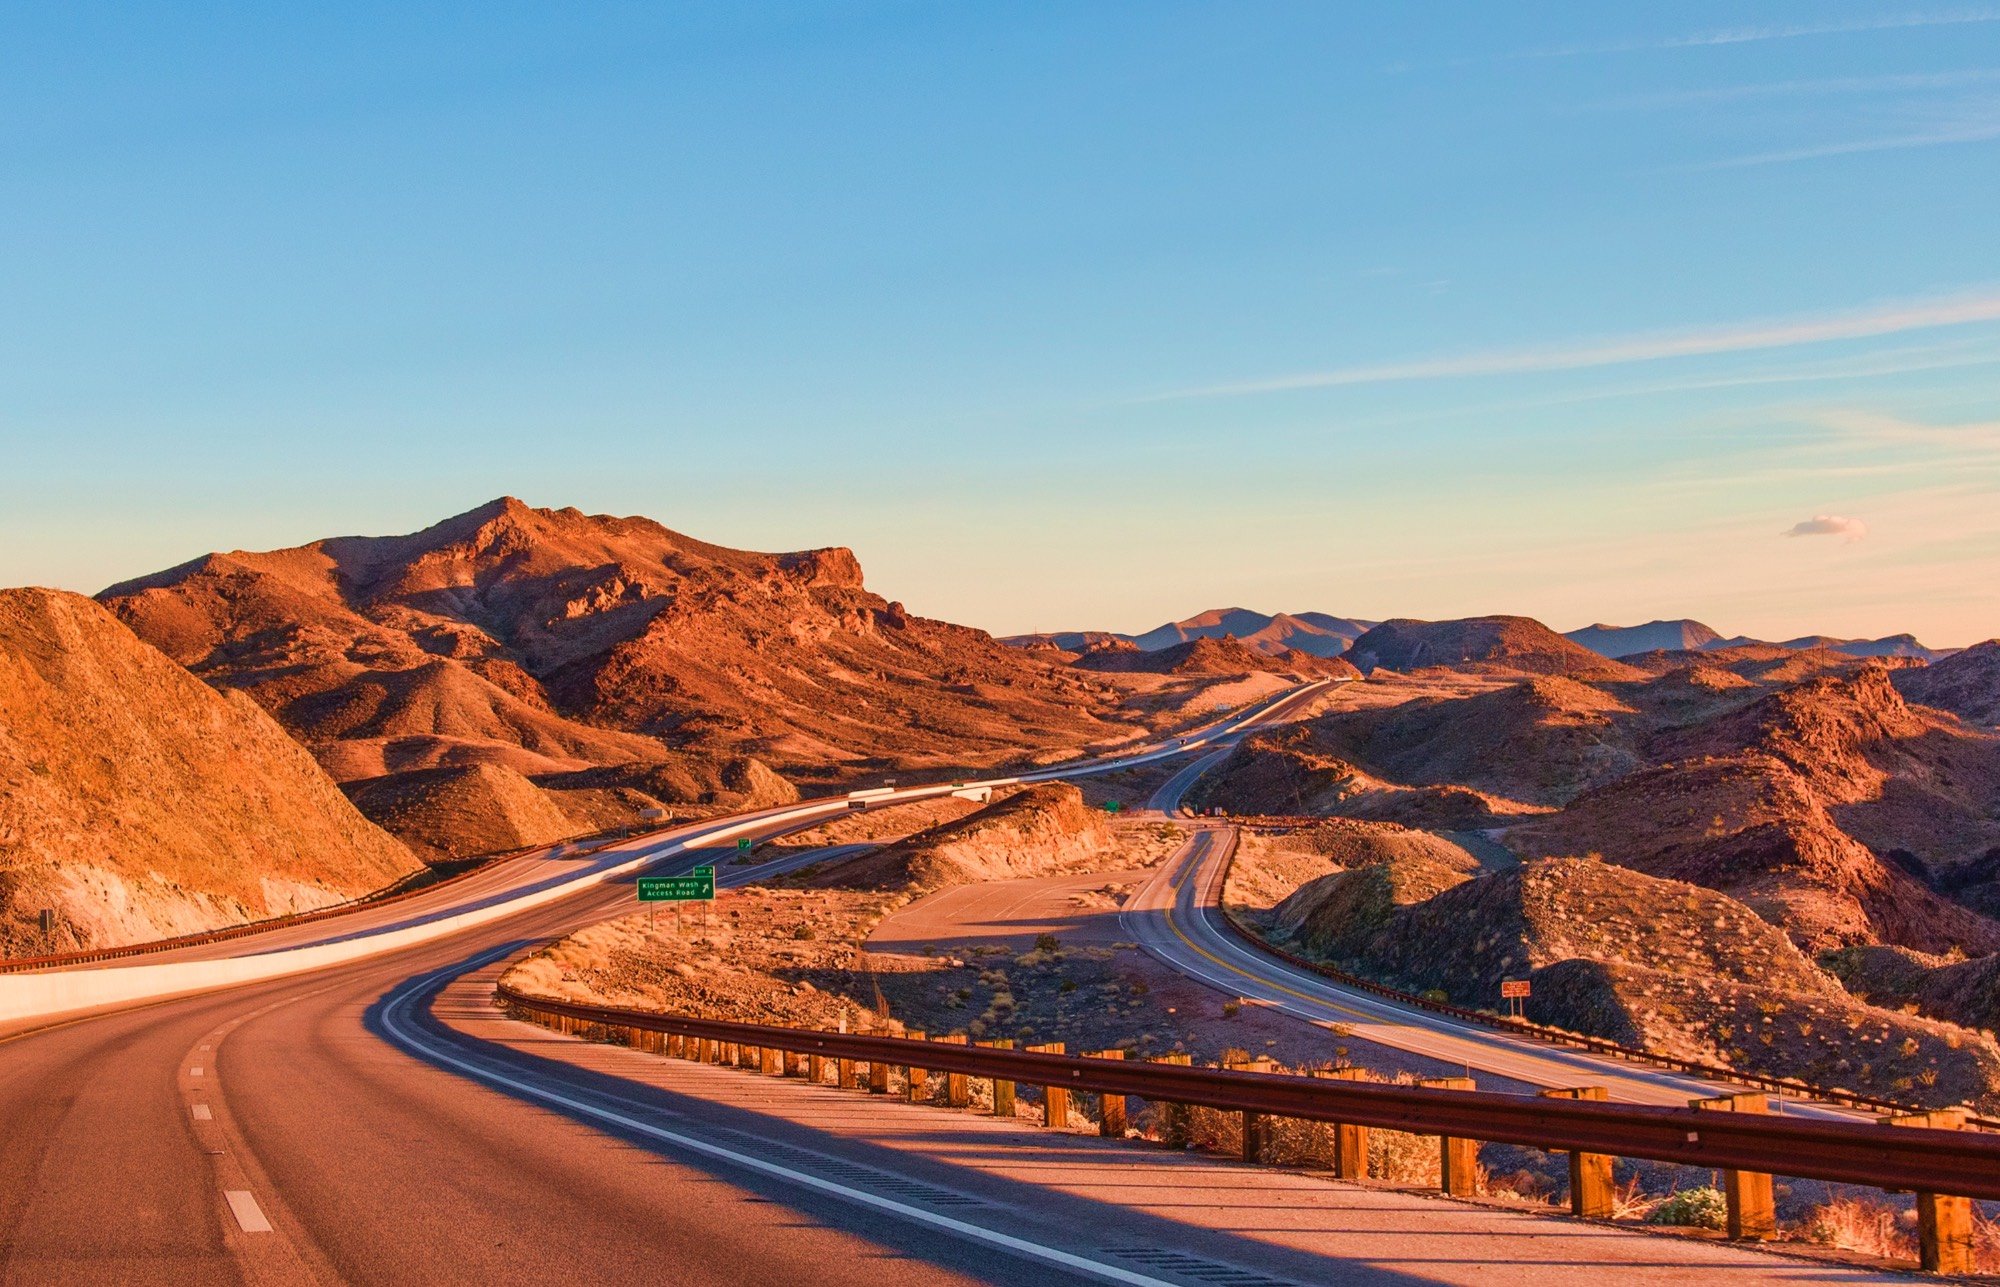 landscape photography showing red rocks near a highway.